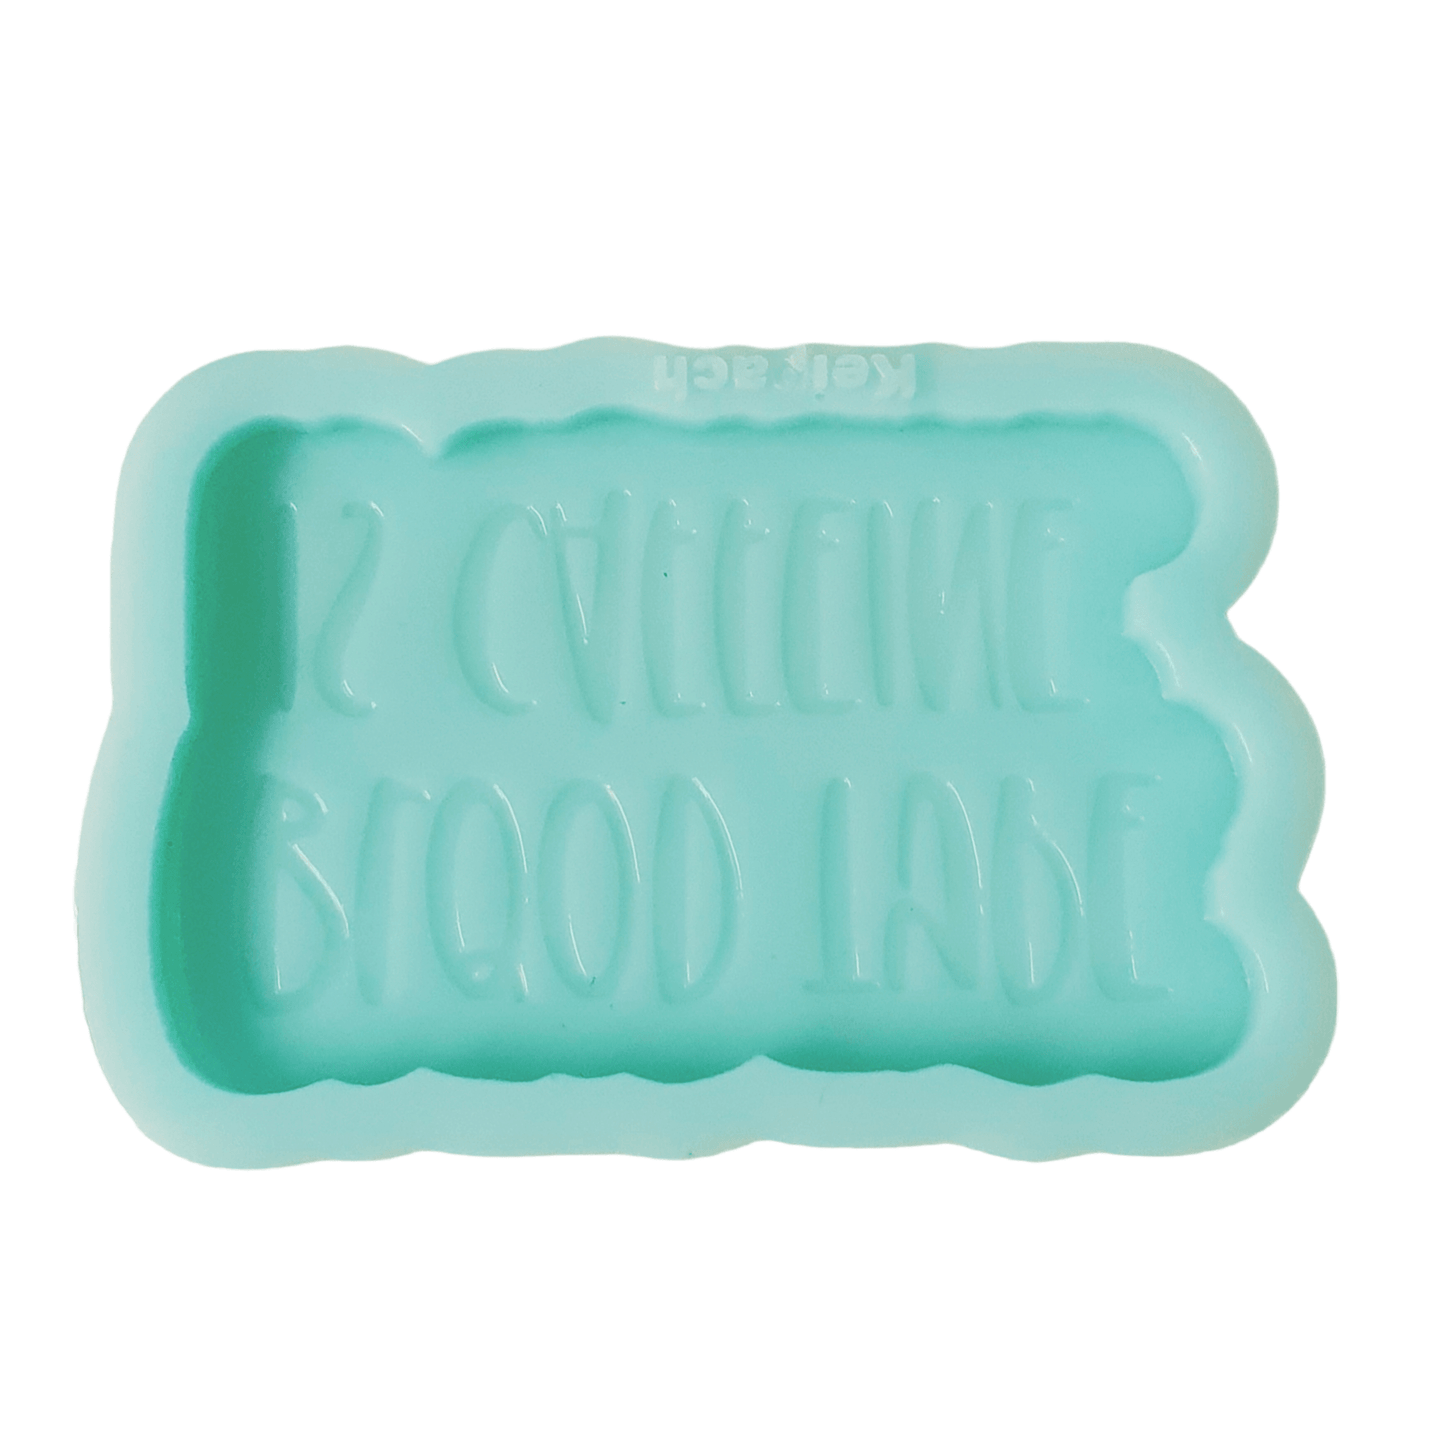 "Blood Type is Caffeine" Silicone Resin Mould - Keipach